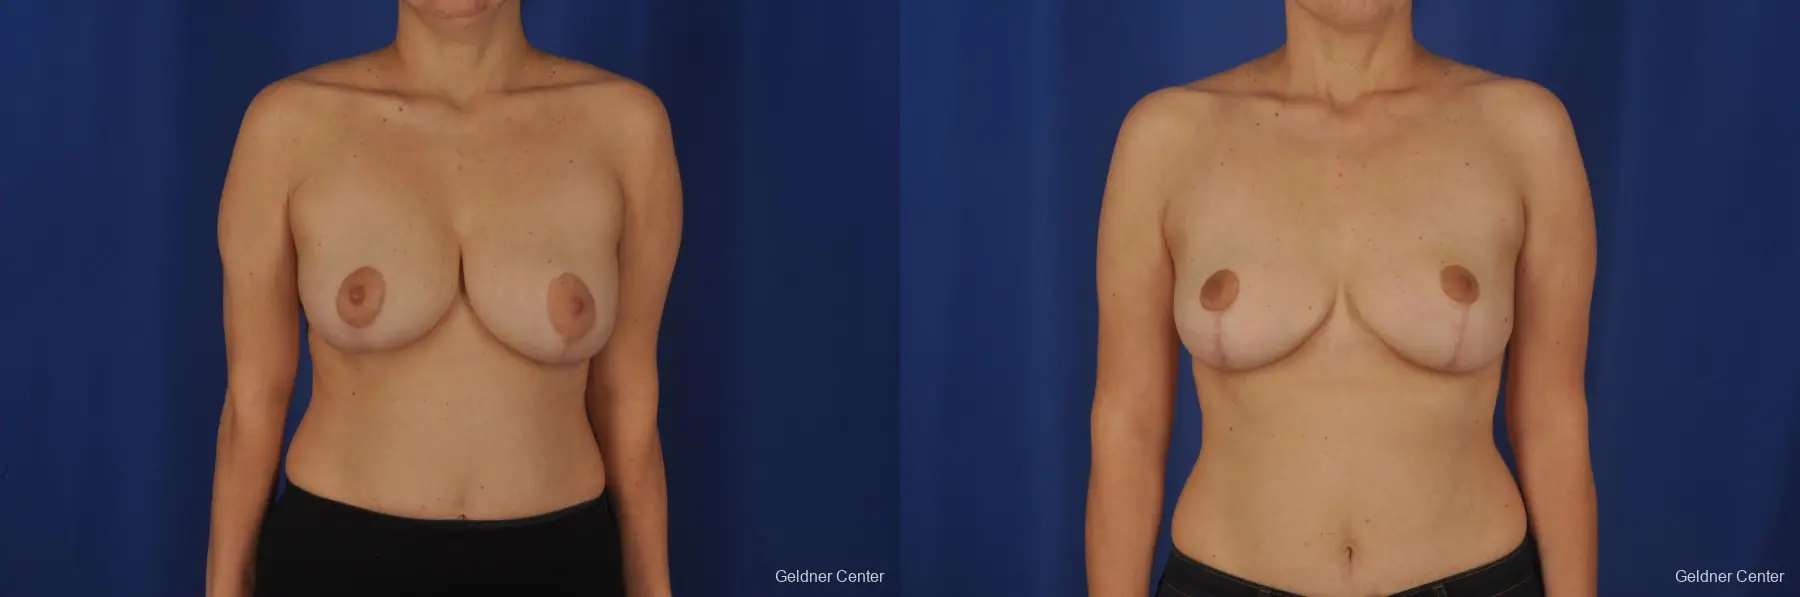 Chicago Breast Reduction 2068 - Before and After